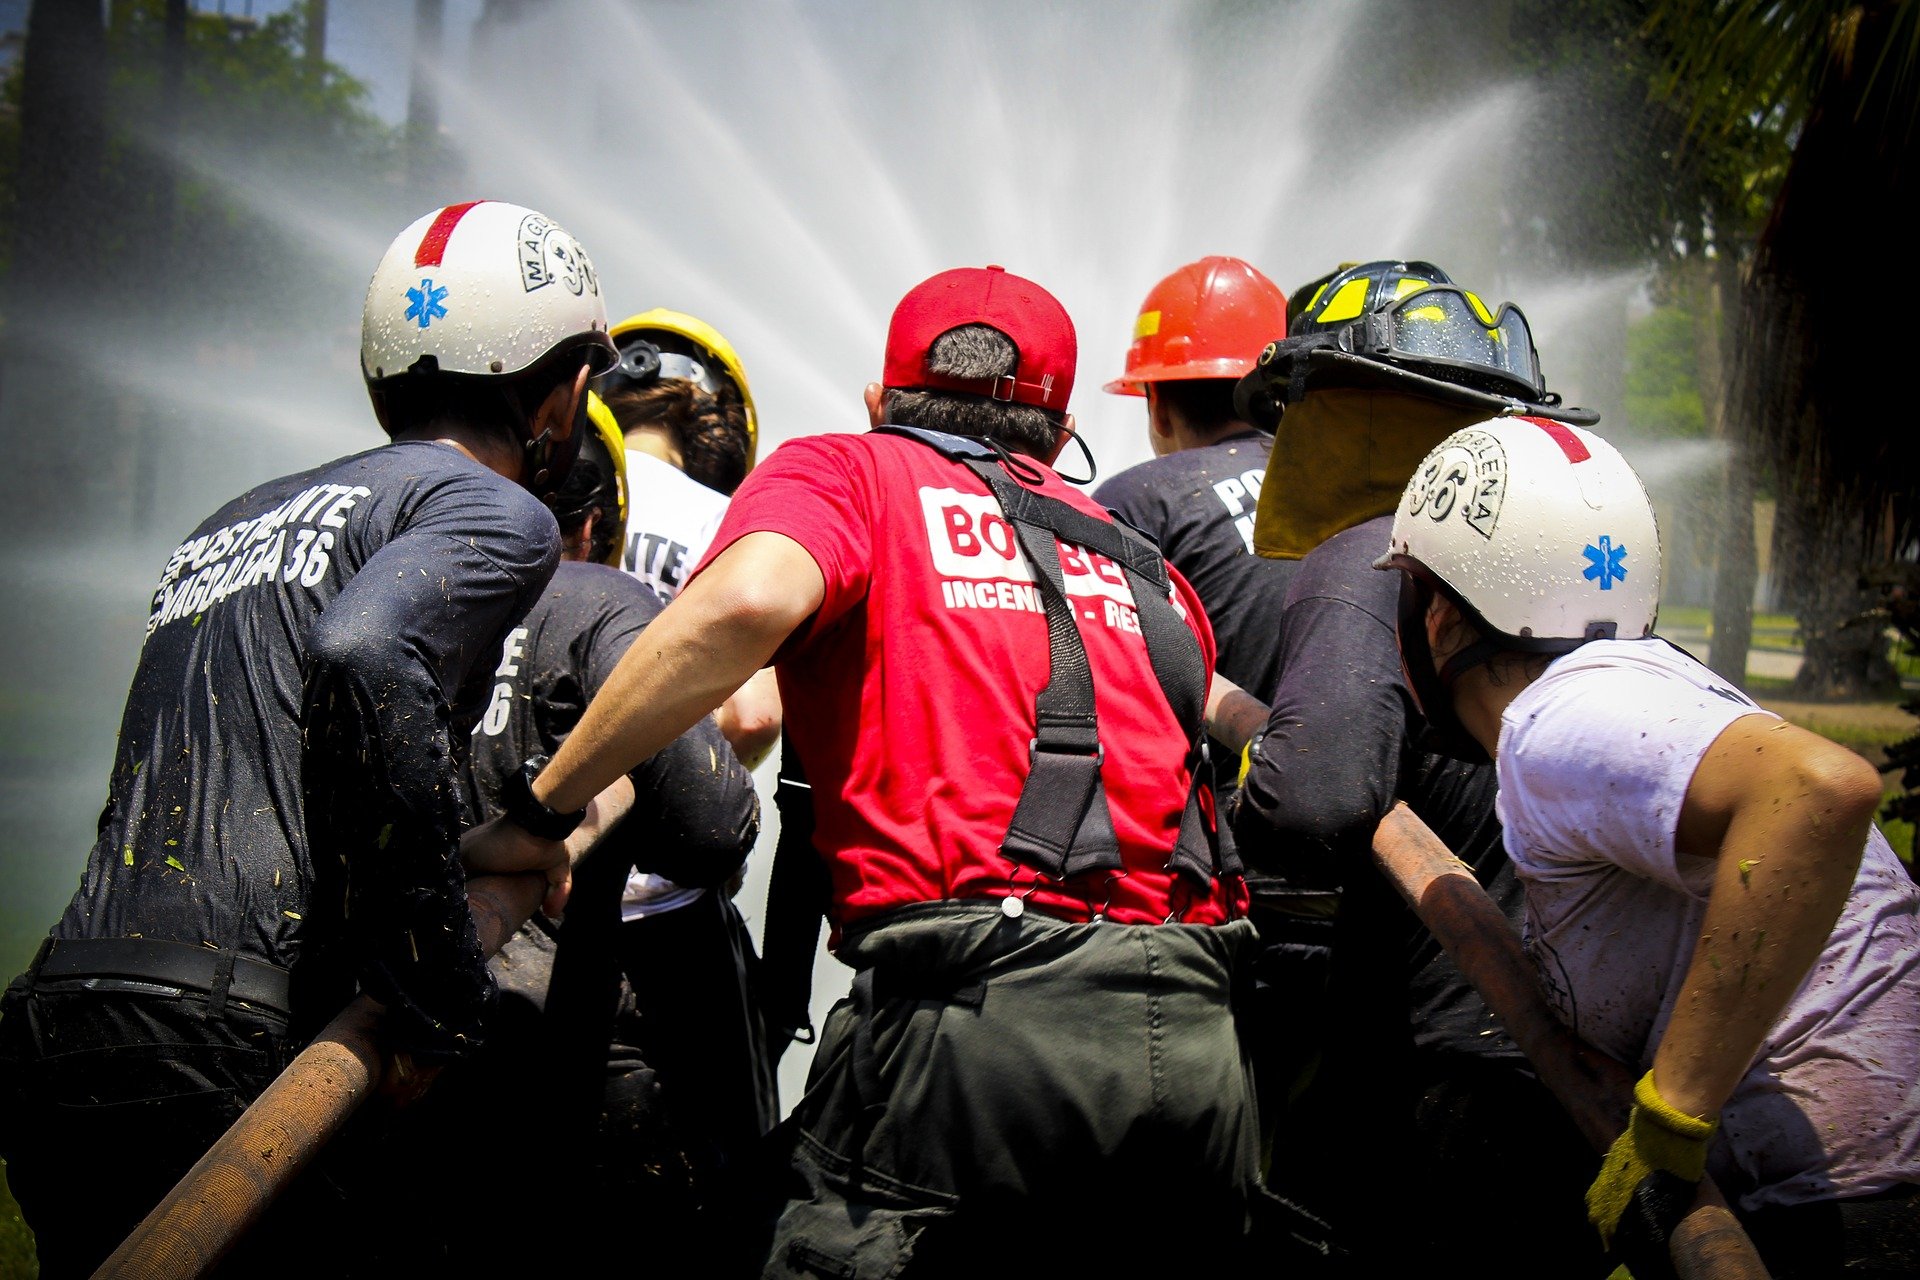 Rescue team putting out flames with a hose | Source: Pixabay